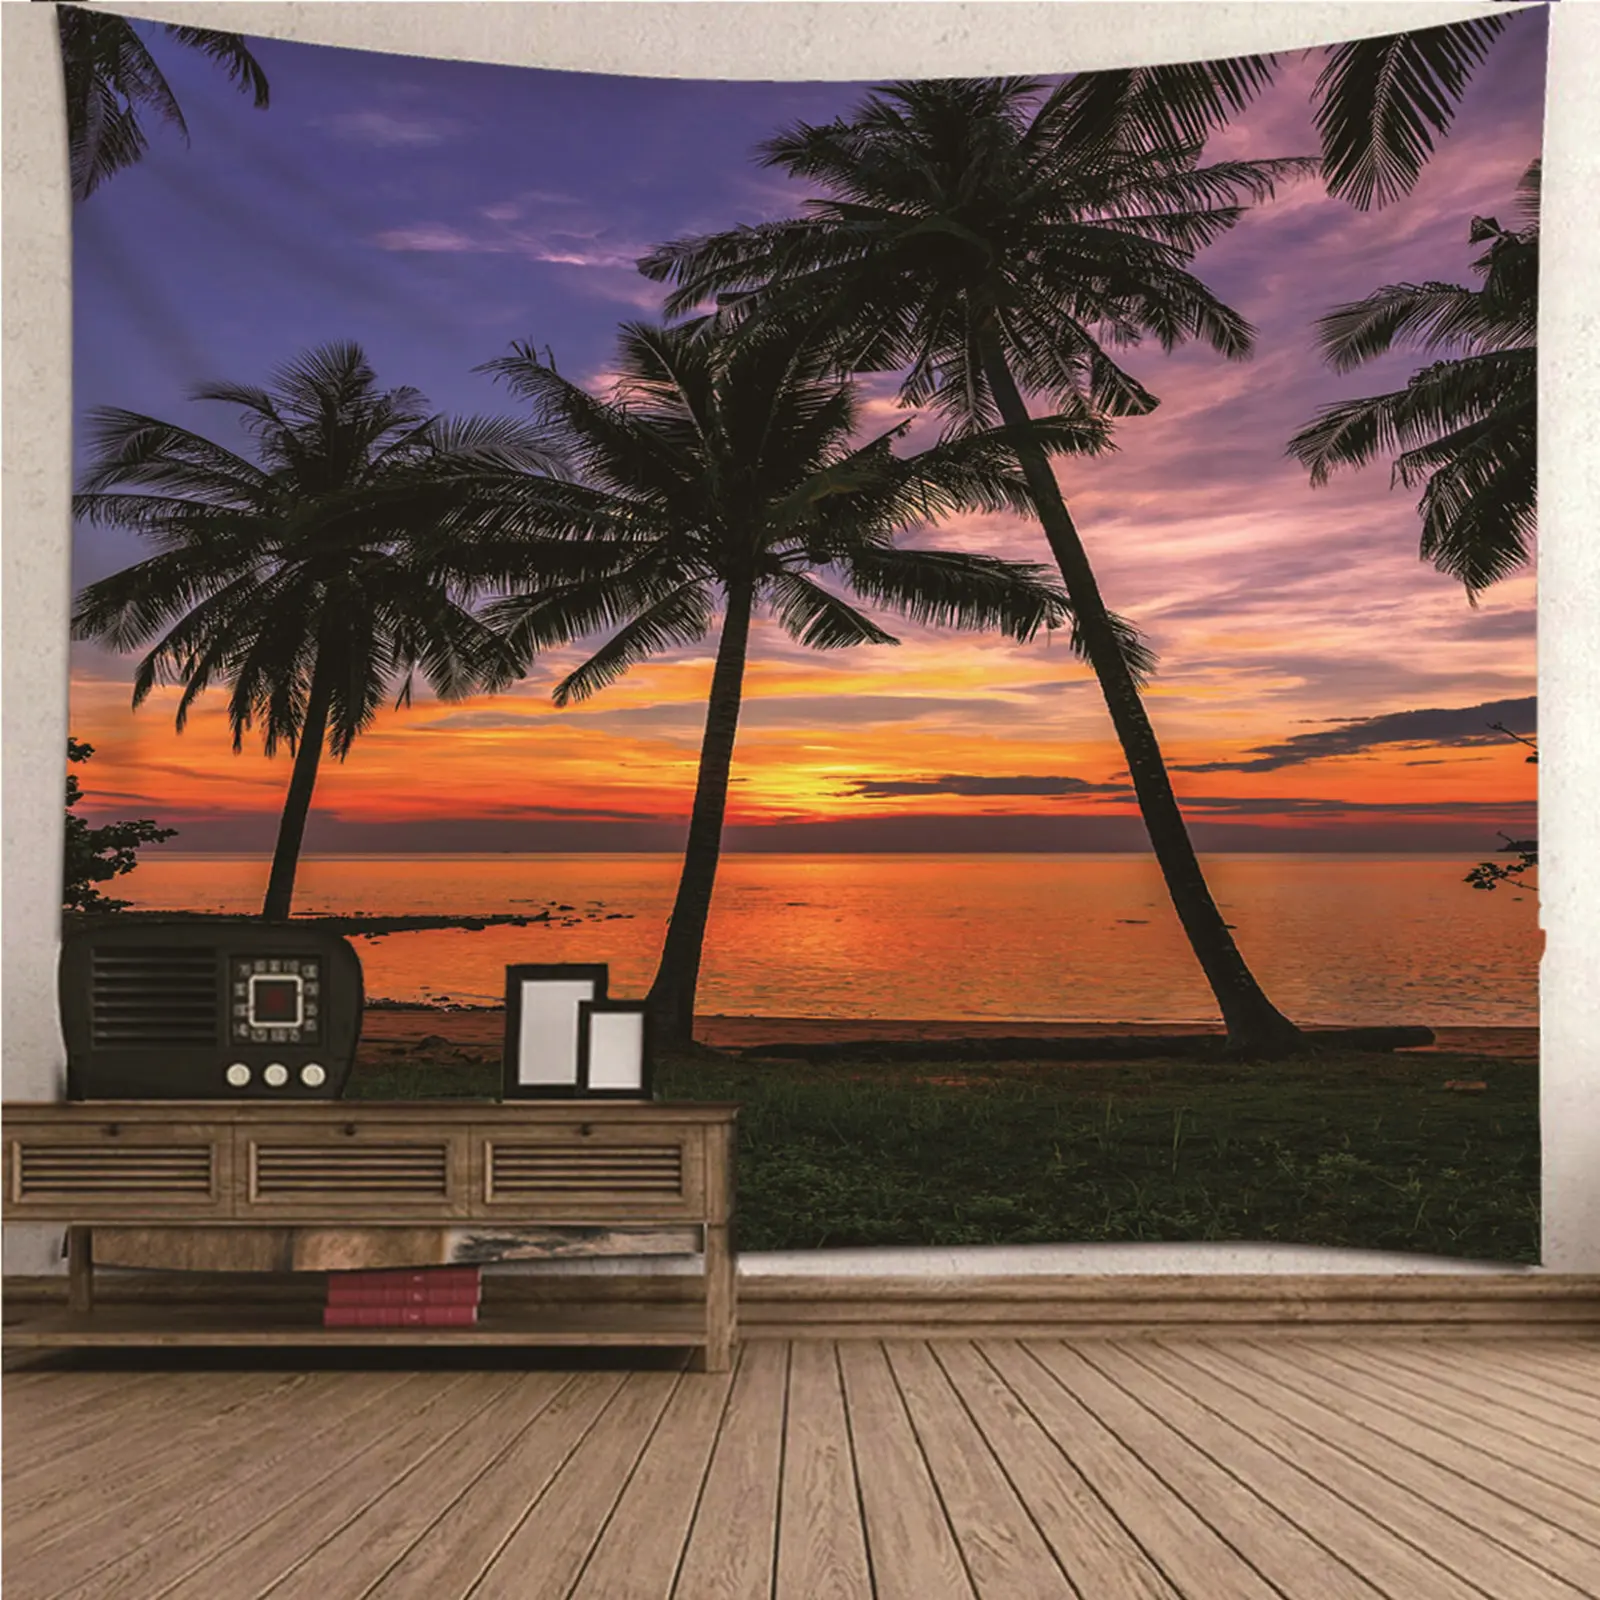 

Wall Art Hanging Large Tapestry Throw natural scenery Sunset Beach Coconut Tree Wall Hanging Blanket Dorm Art Decor Covering